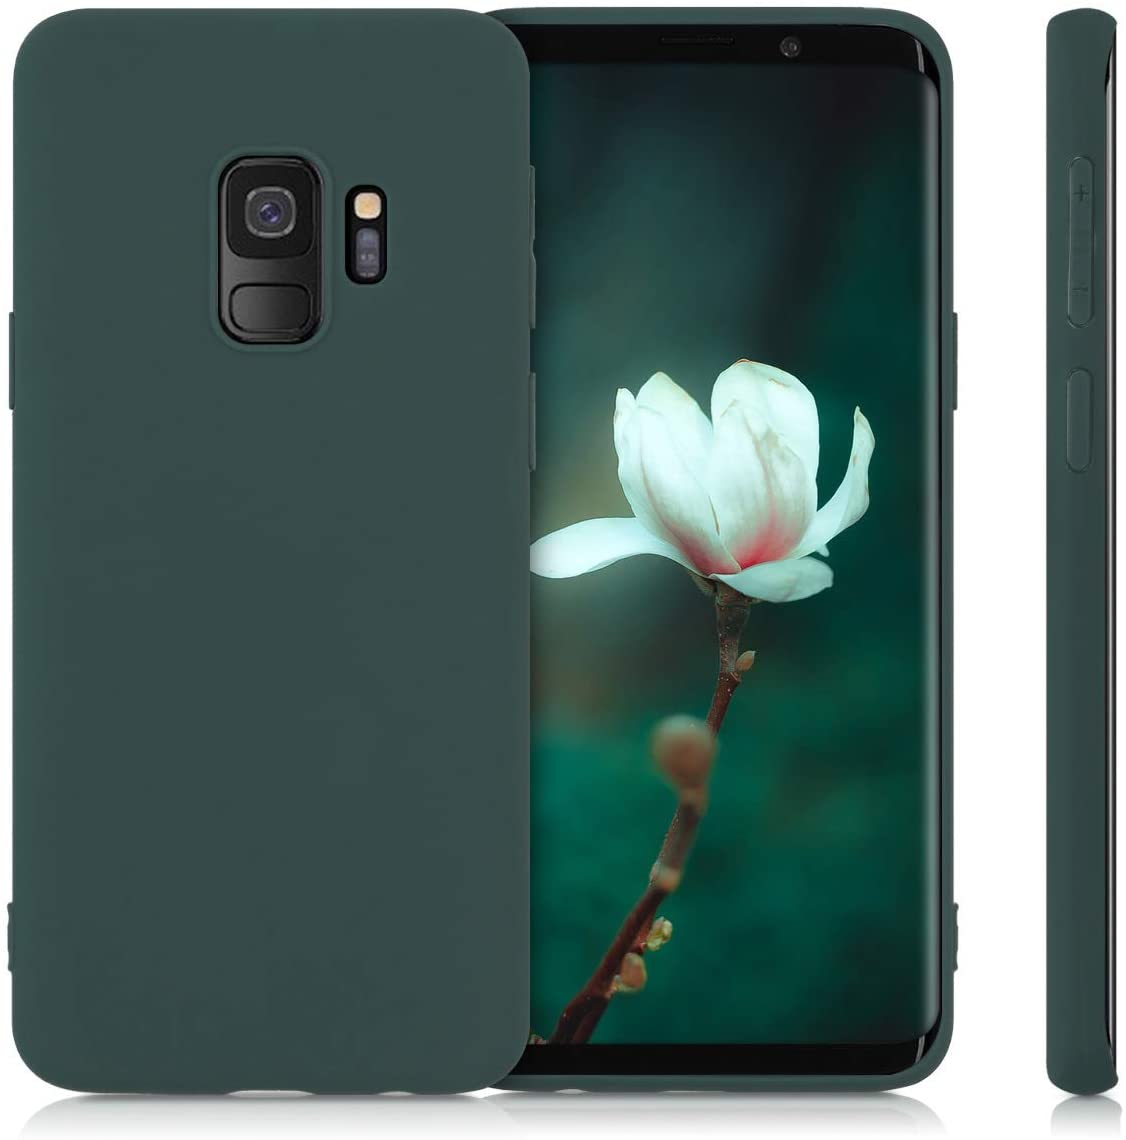 kwmobile TPU Case Compatible with Samsung Galaxy S9 - Case Soft Thin Slim Smooth Flexible Protective Phone Cover - Moss Green. - e4cents